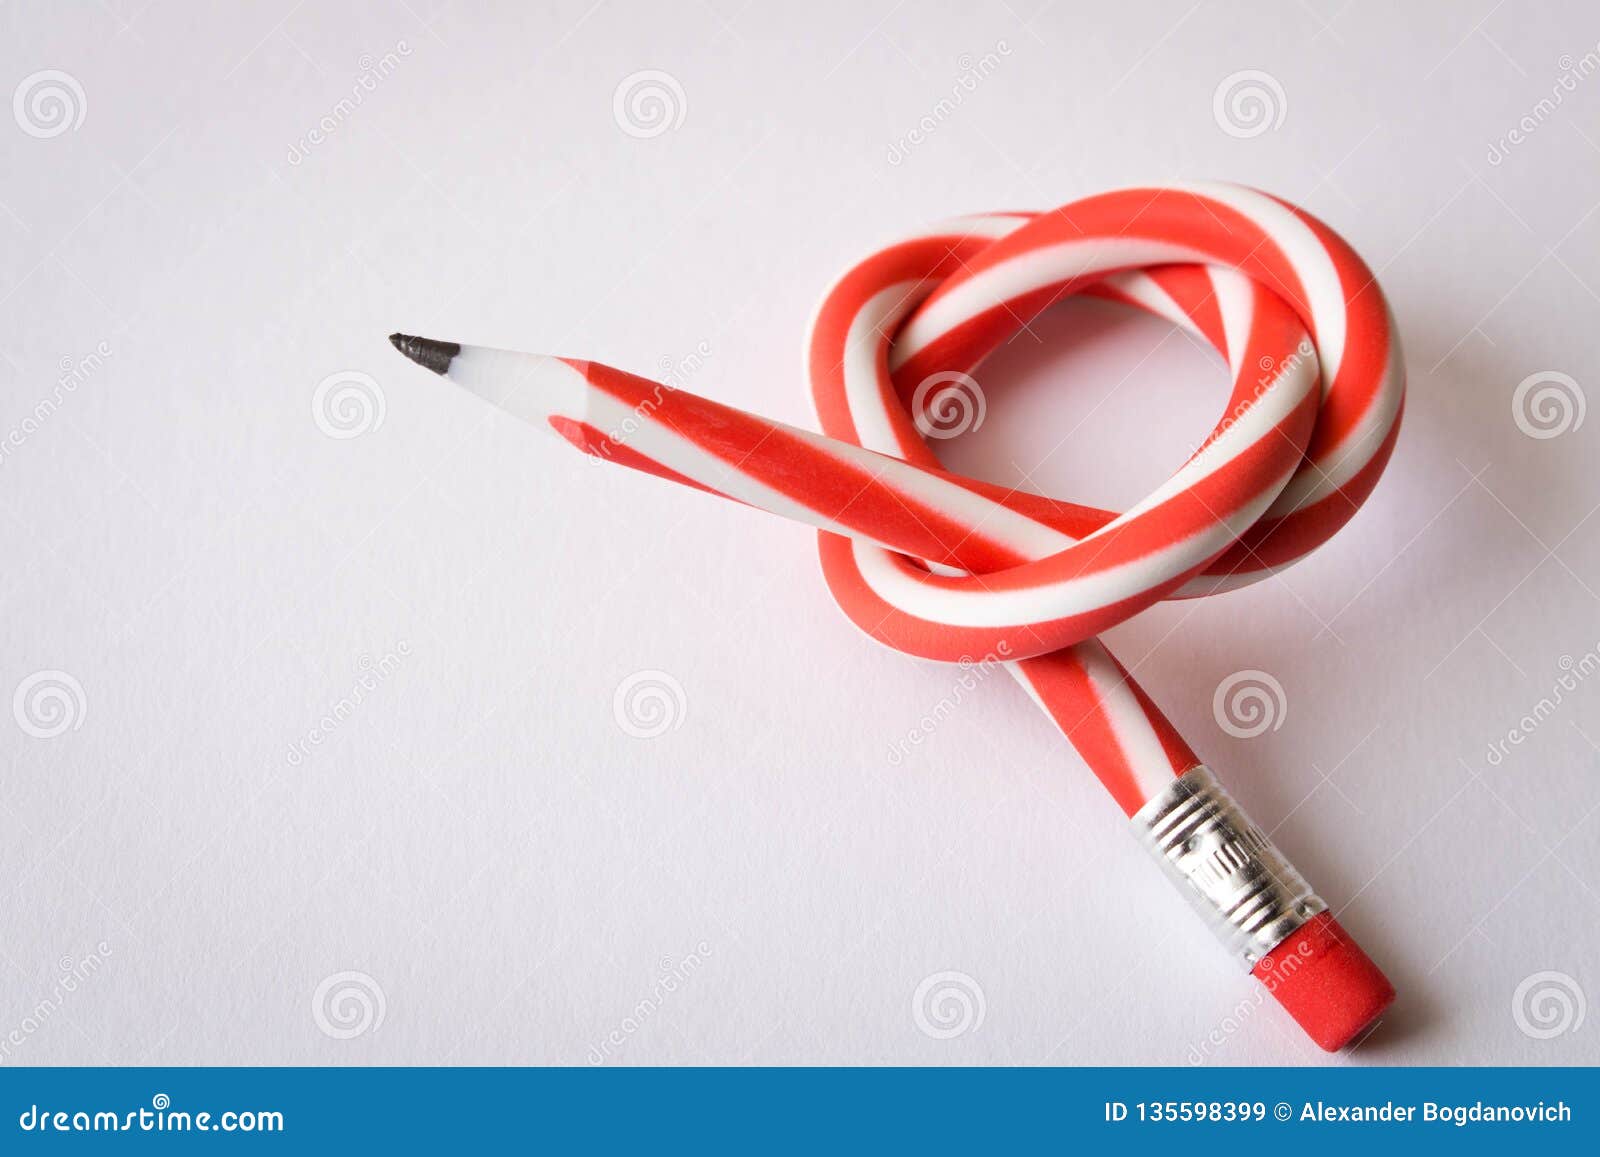 Flexible Pencil . On White Background. Bending Pencil Stock Image ...